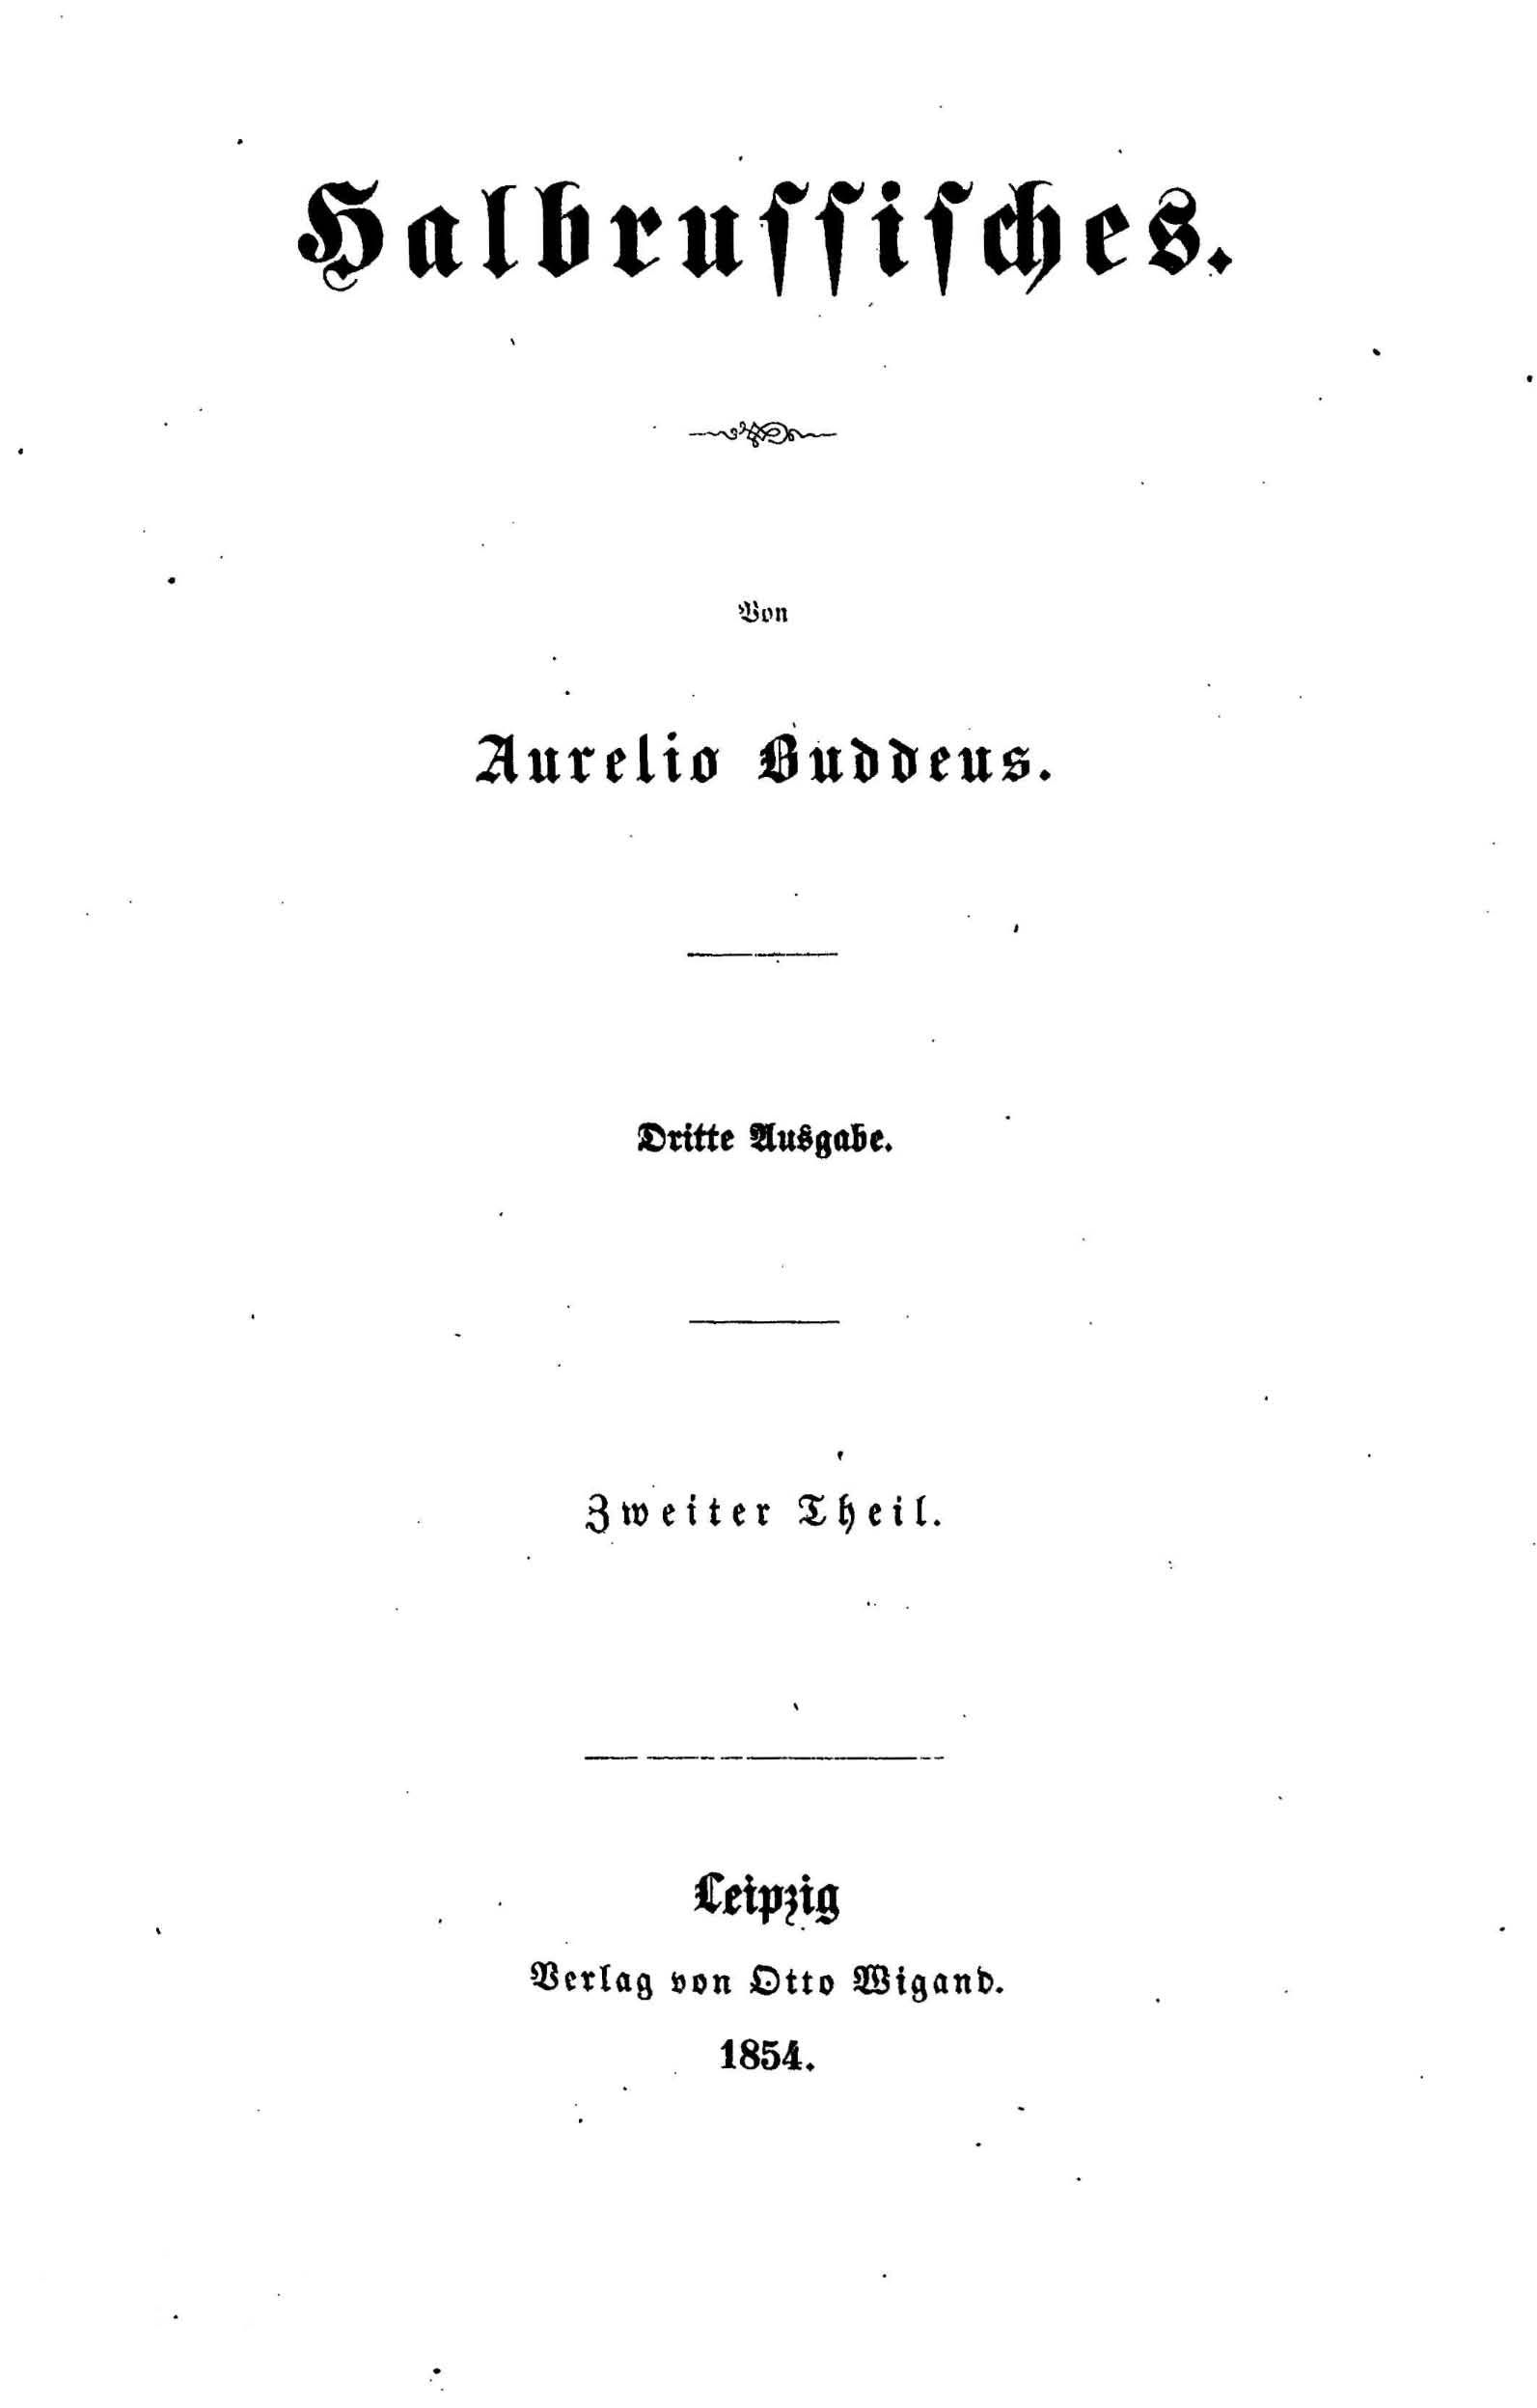 Halbrussisches [2] (1847) | 1. Title page